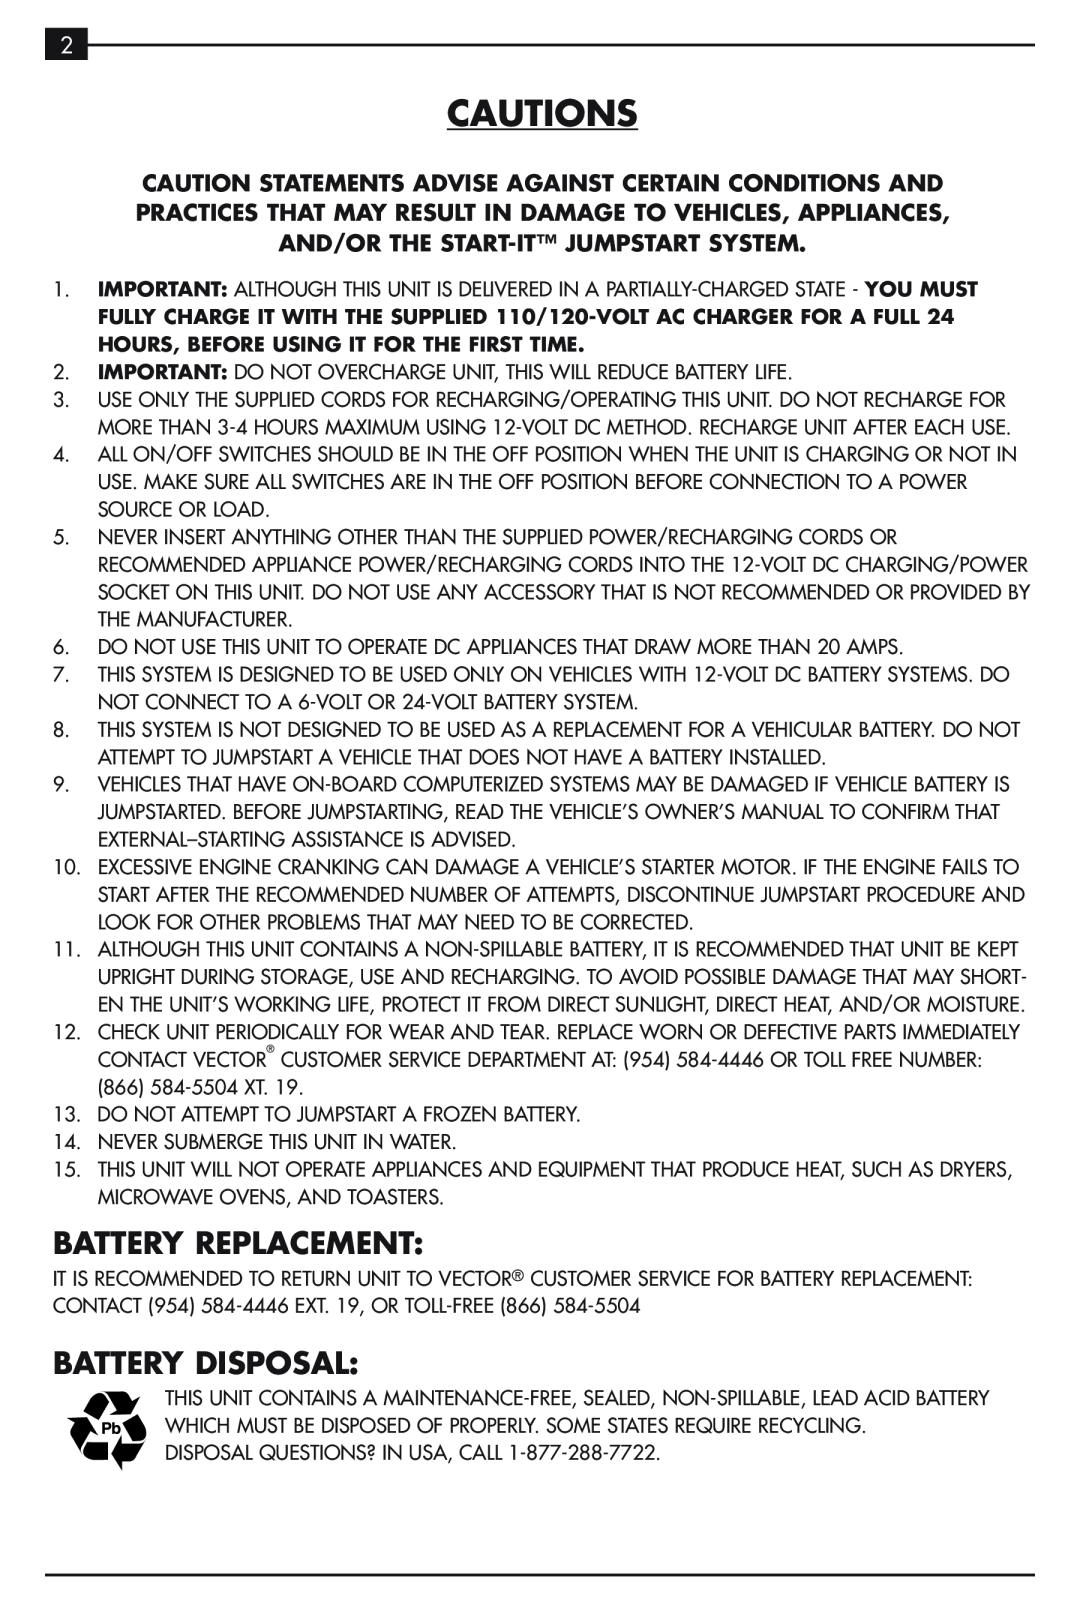 Vector VEC021ST owner manual Cautions, Battery Replacement, Battery Disposal 